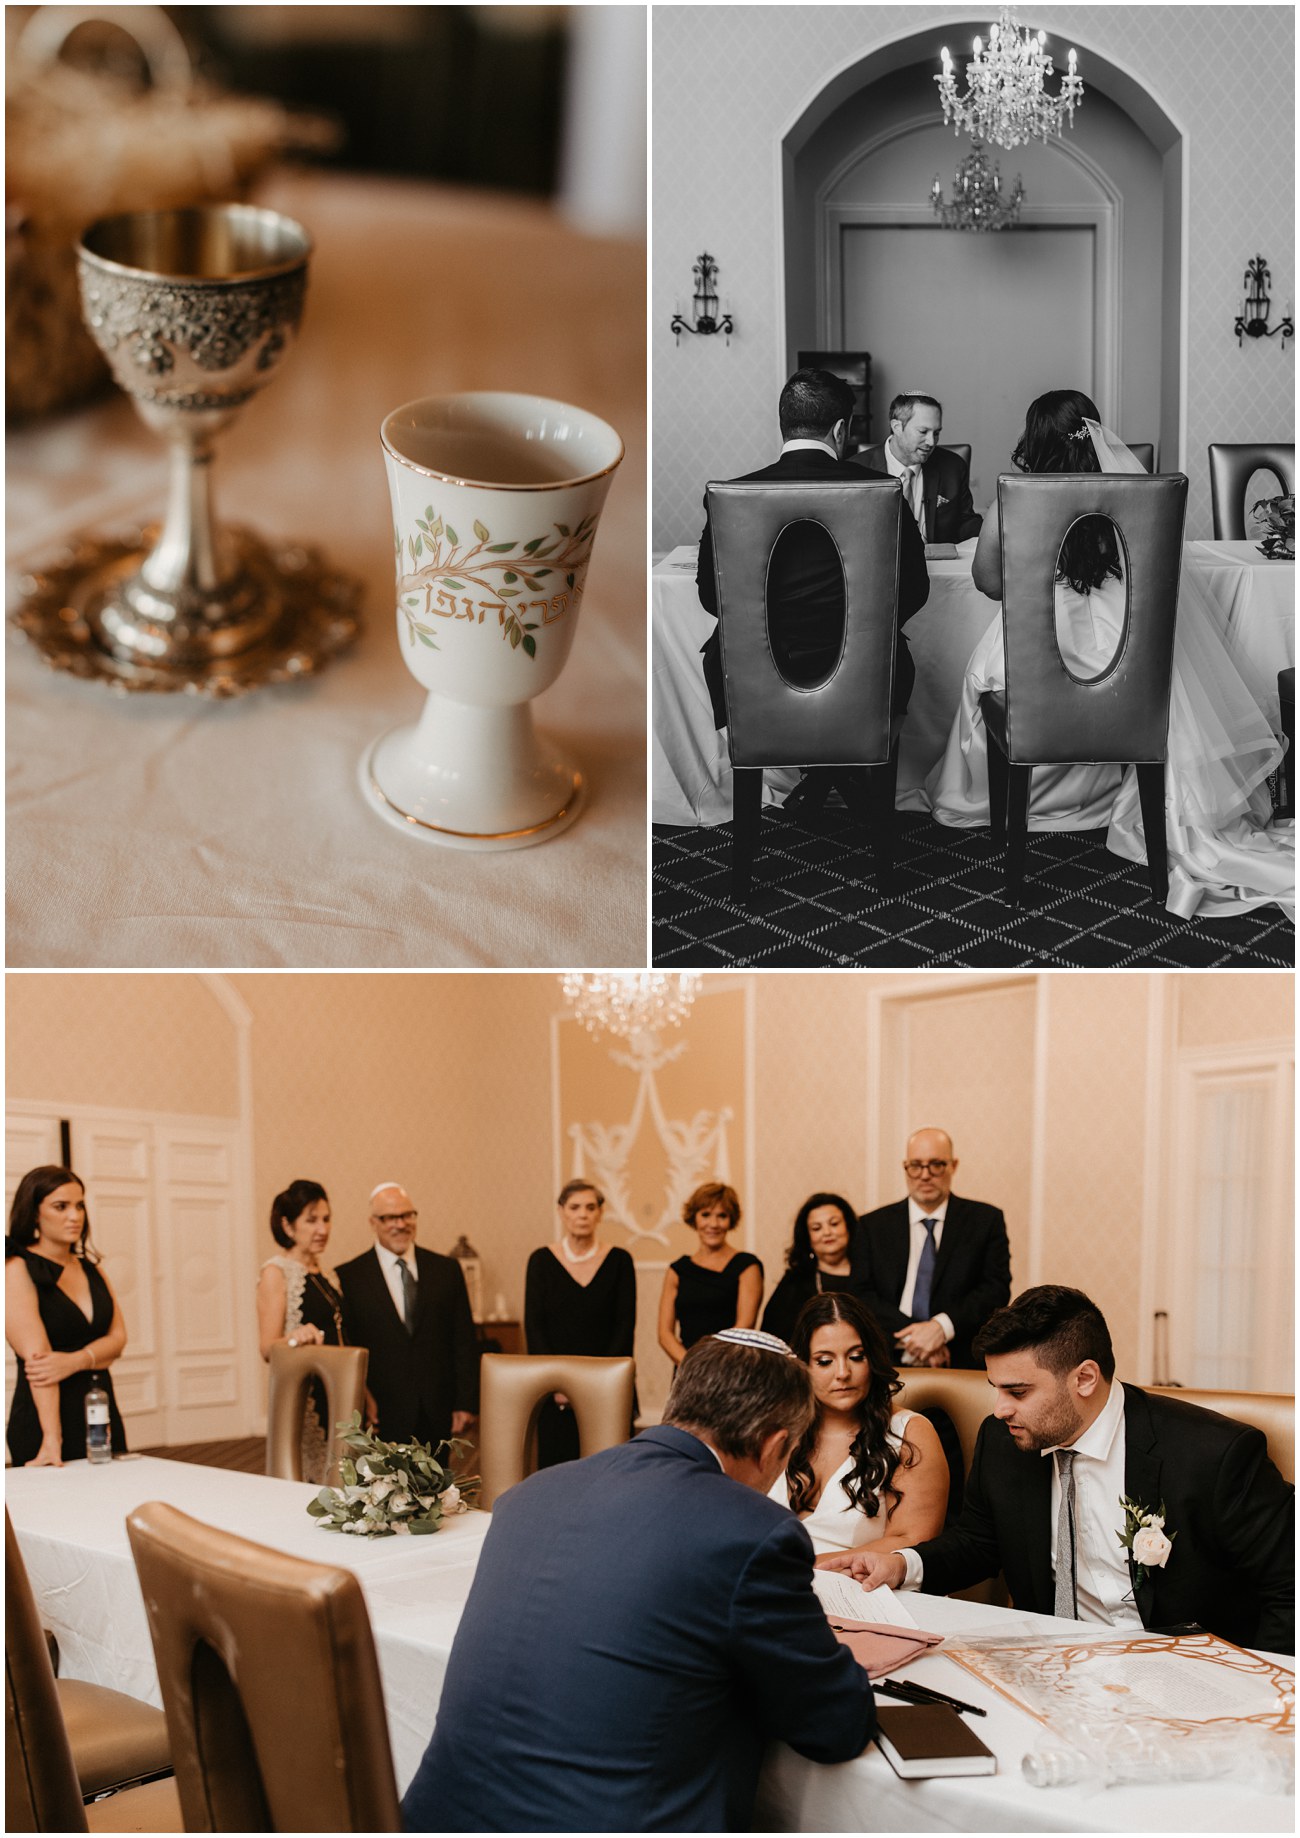 Collage of the ketubah signing at The Berkeley Hotel Asbury Park wedding